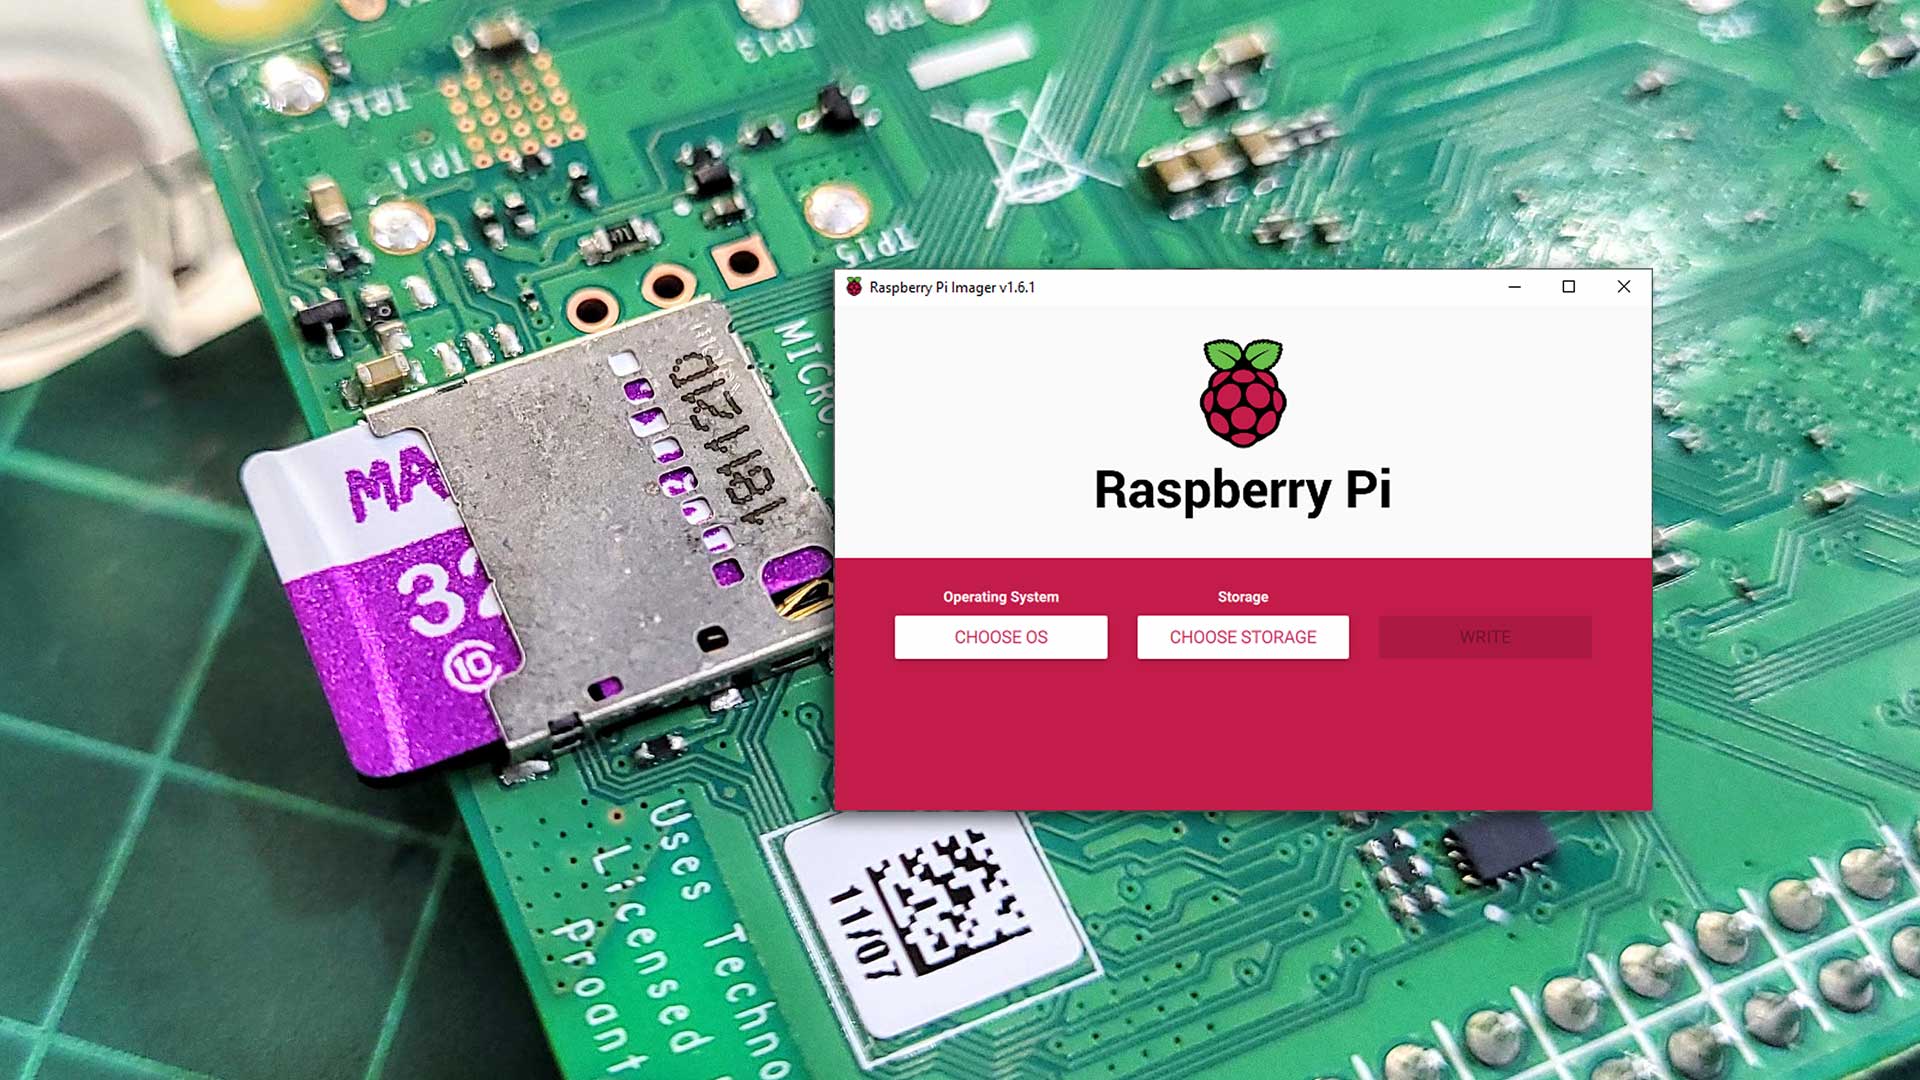 With Raspberry Pi Imager, you can write Raspberry Pi OS and remote SSH easier